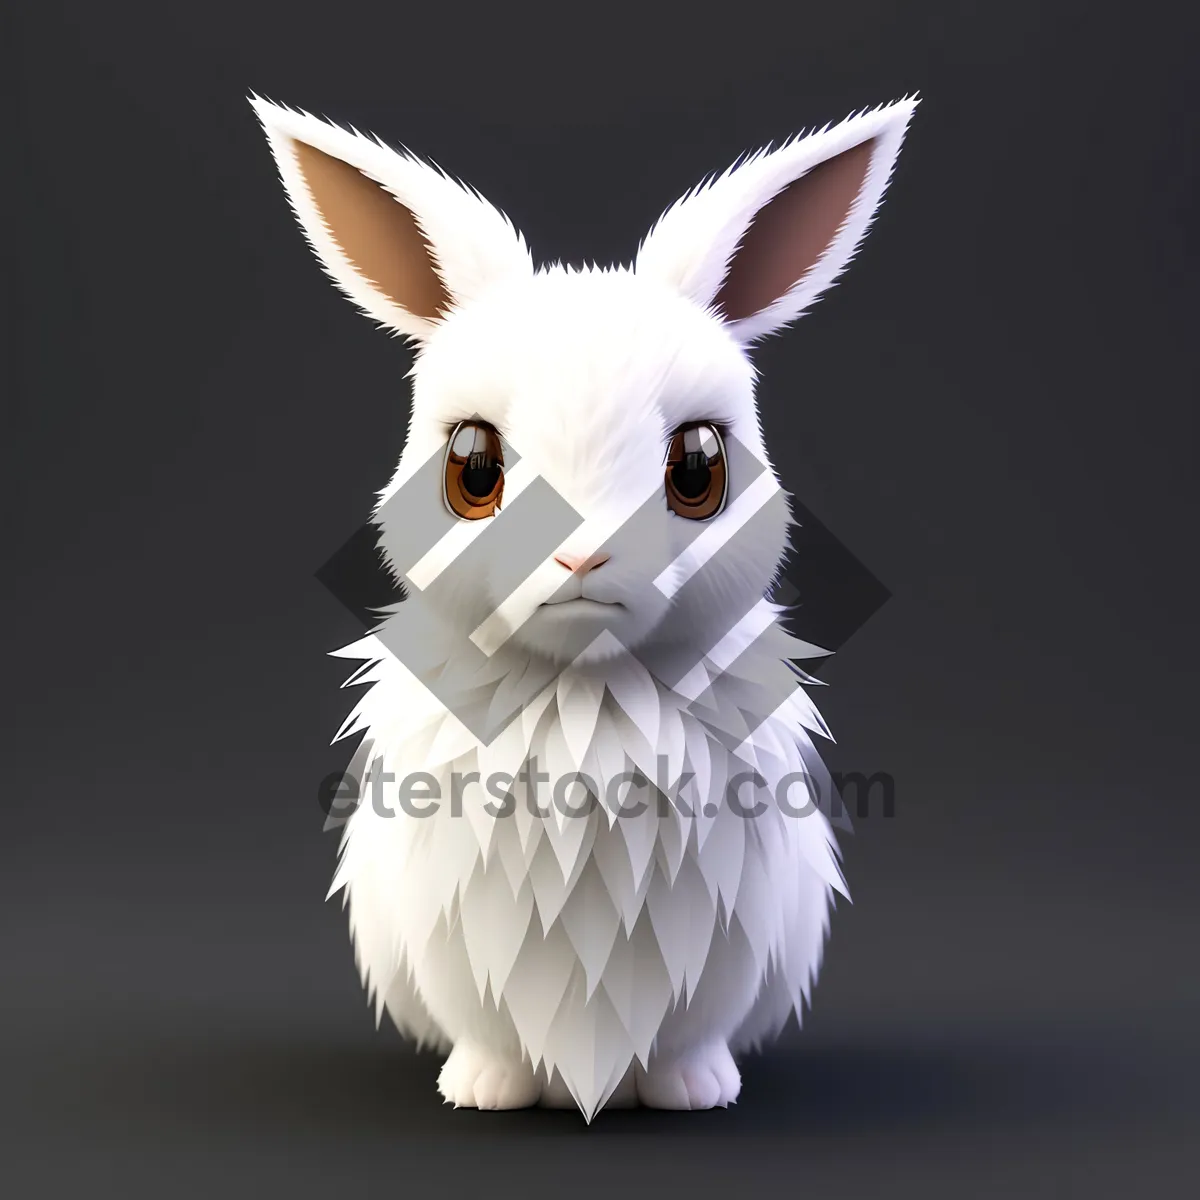 Picture of Furry Bunny with Fluffy Ears - Cute Pet in a Studio Portrait